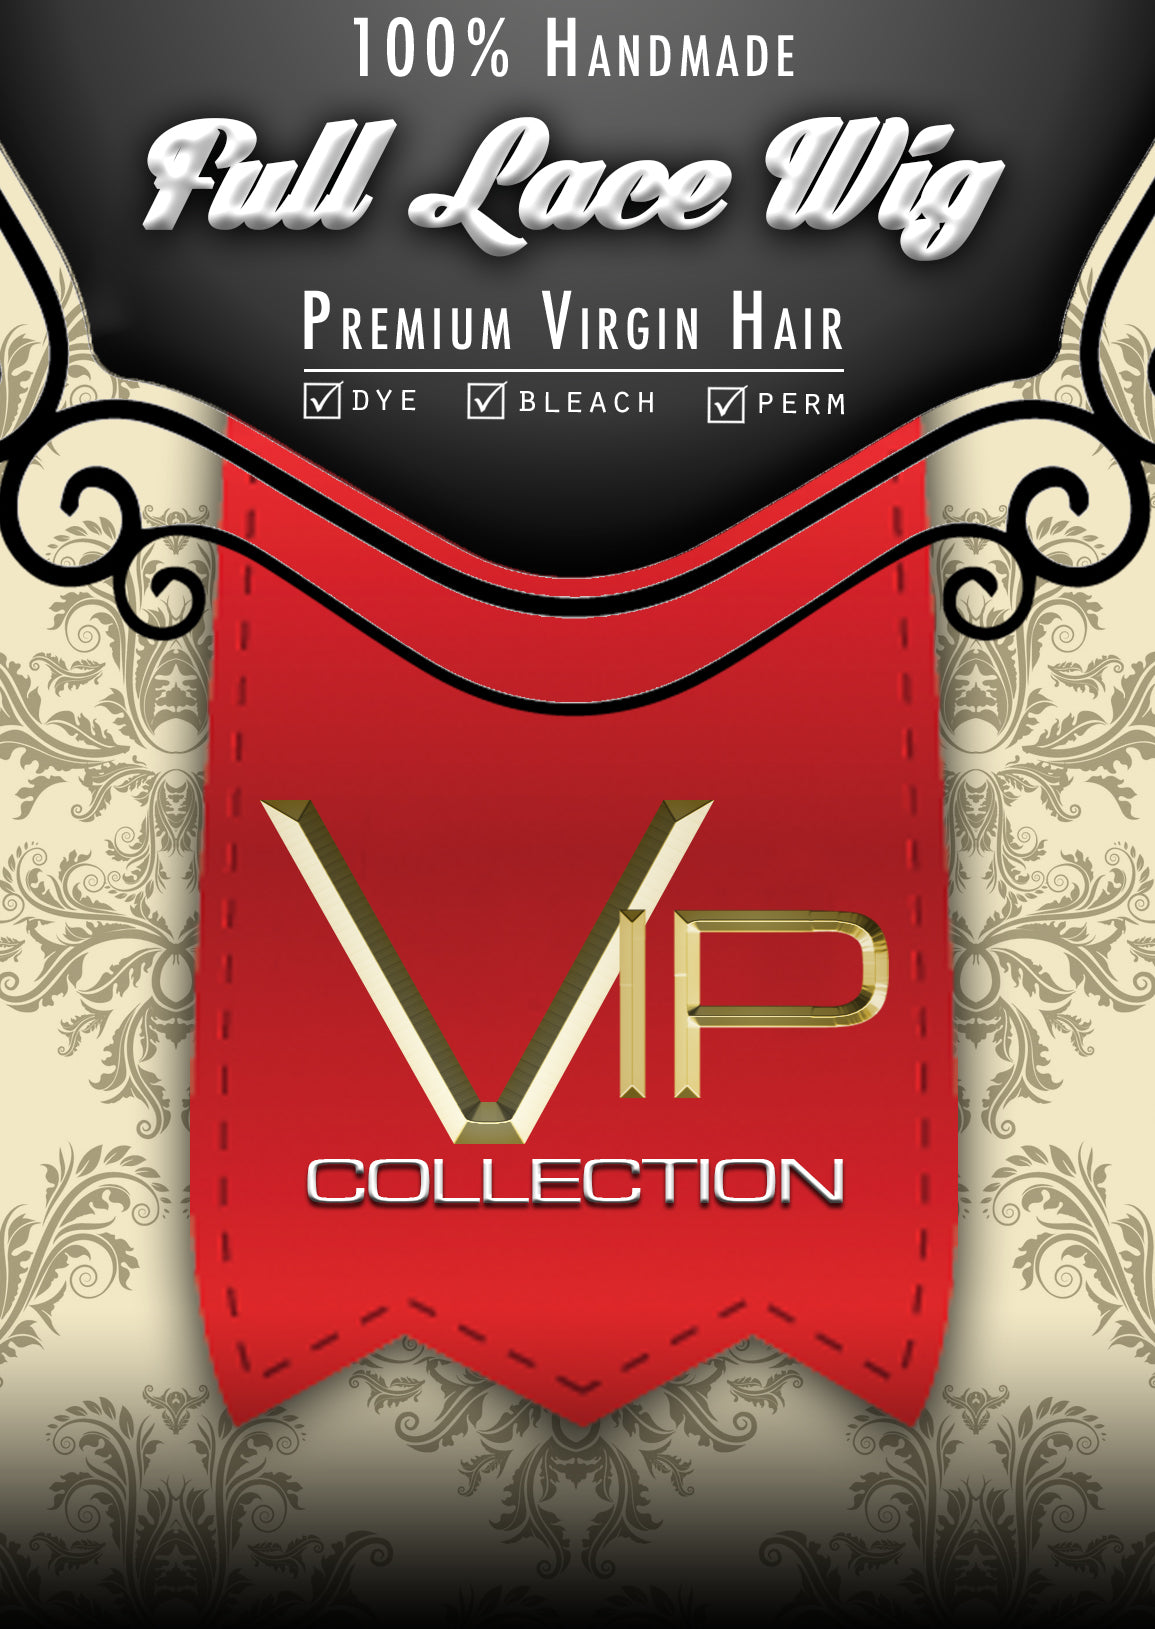 VIP Collection Full Lace Virgin Wigs